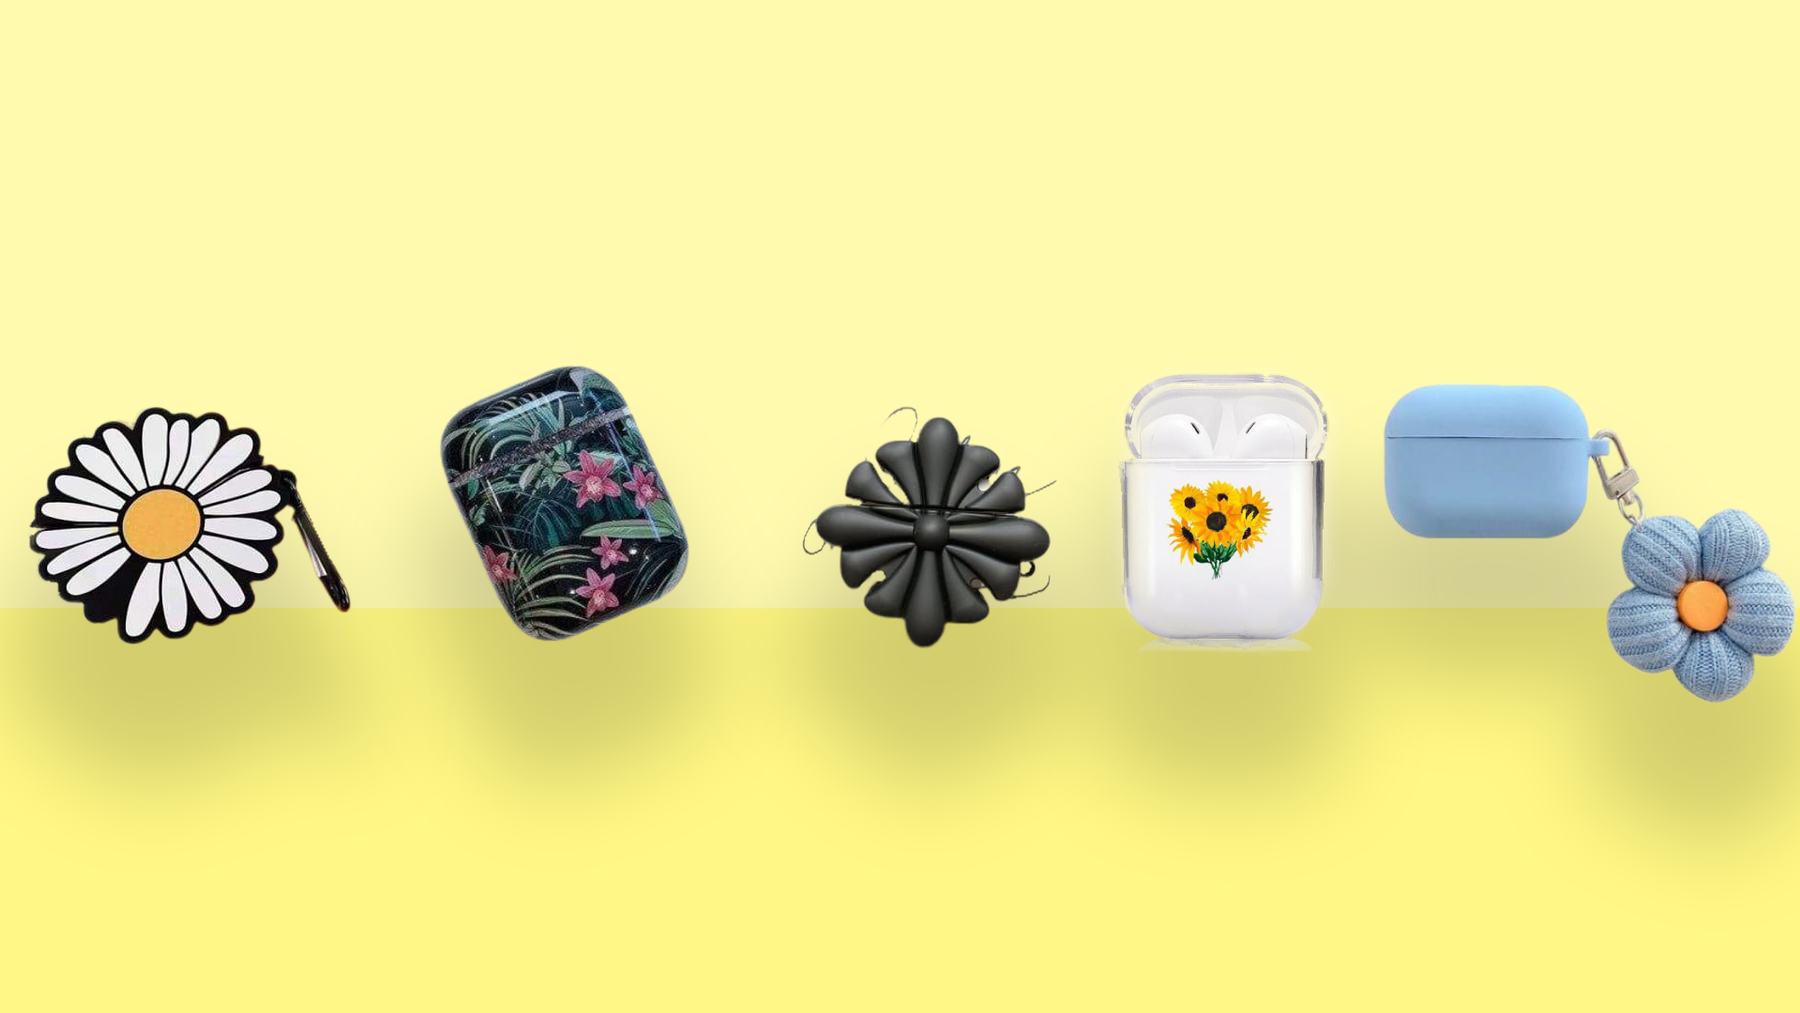 Blooming with Style: Our Top 5 Flower AirPods 1_2 Cases & AirPods Pro Cases for Every Occasion